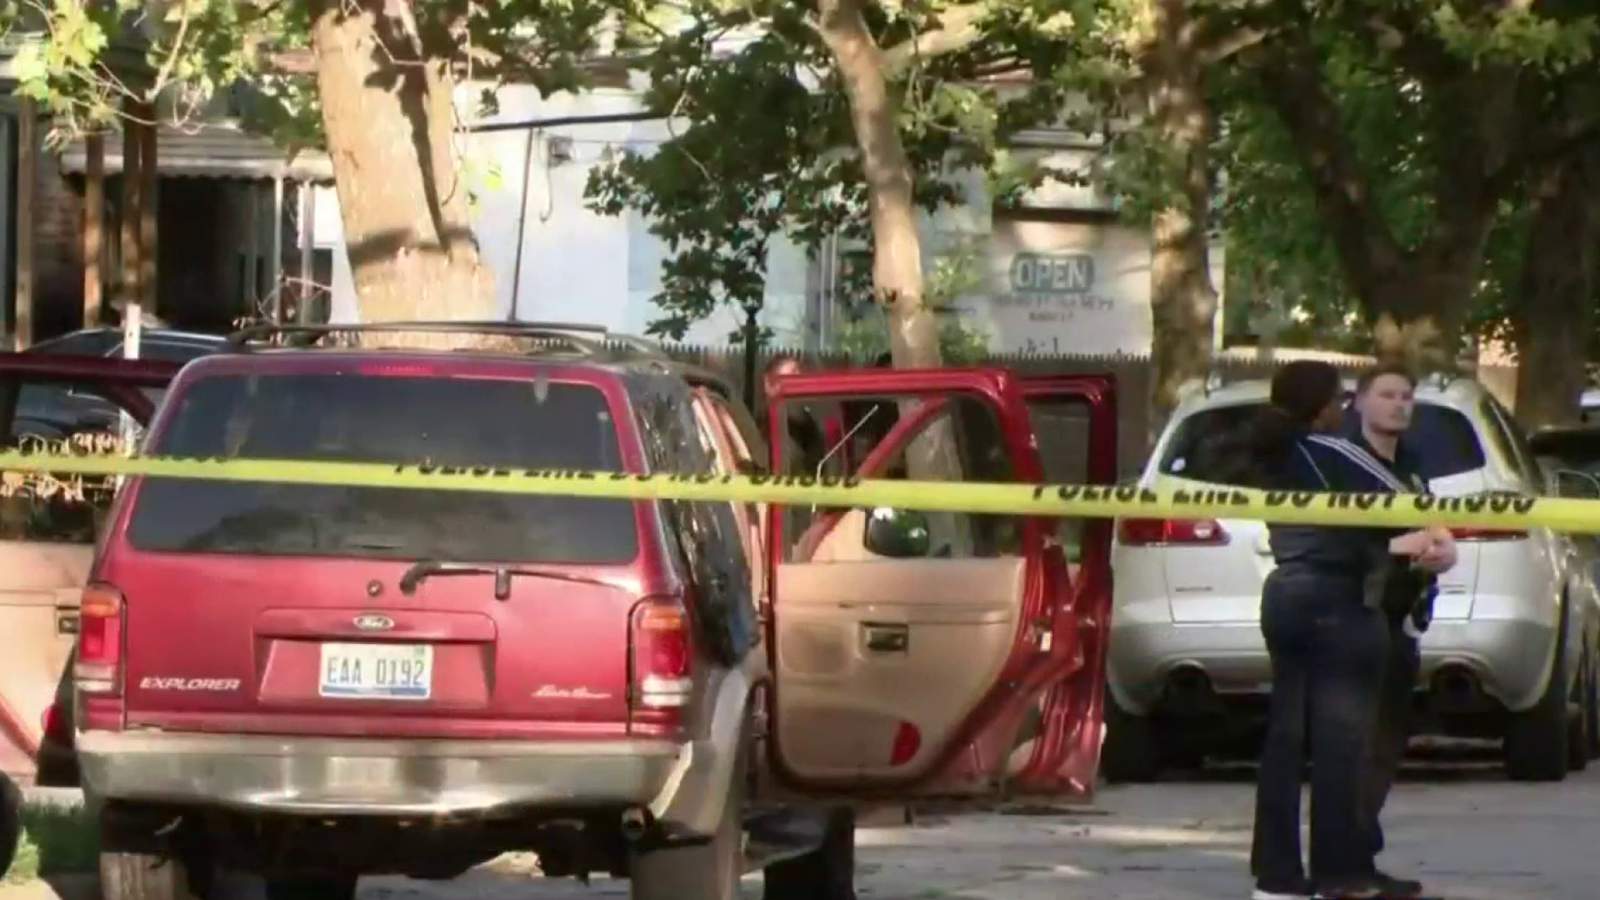 4 teenagers shot sitting in SUV on Detroits east side